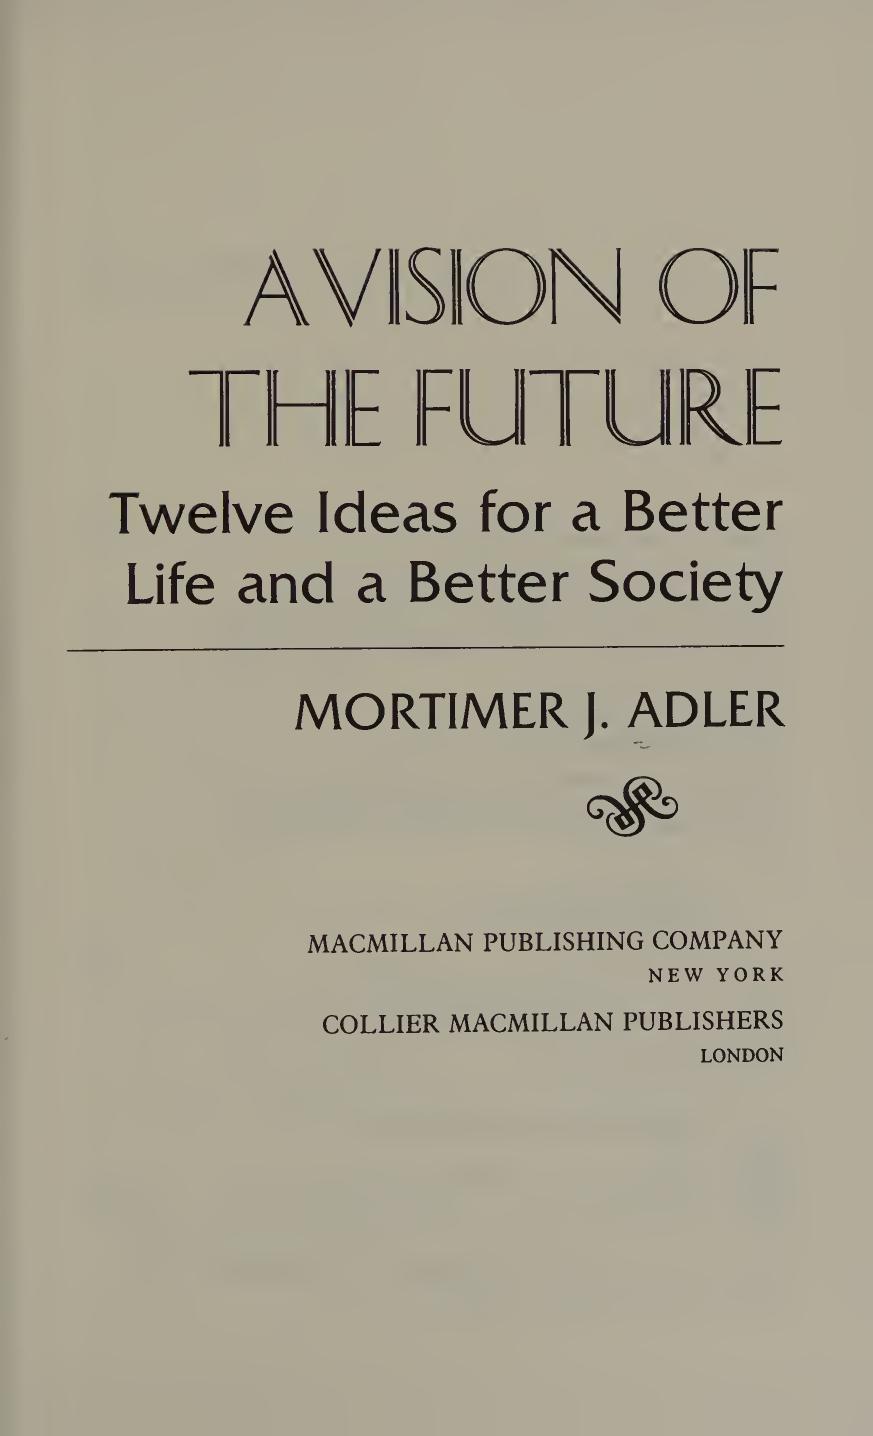 A vision of the future : twelve ideas for a better life and a better society